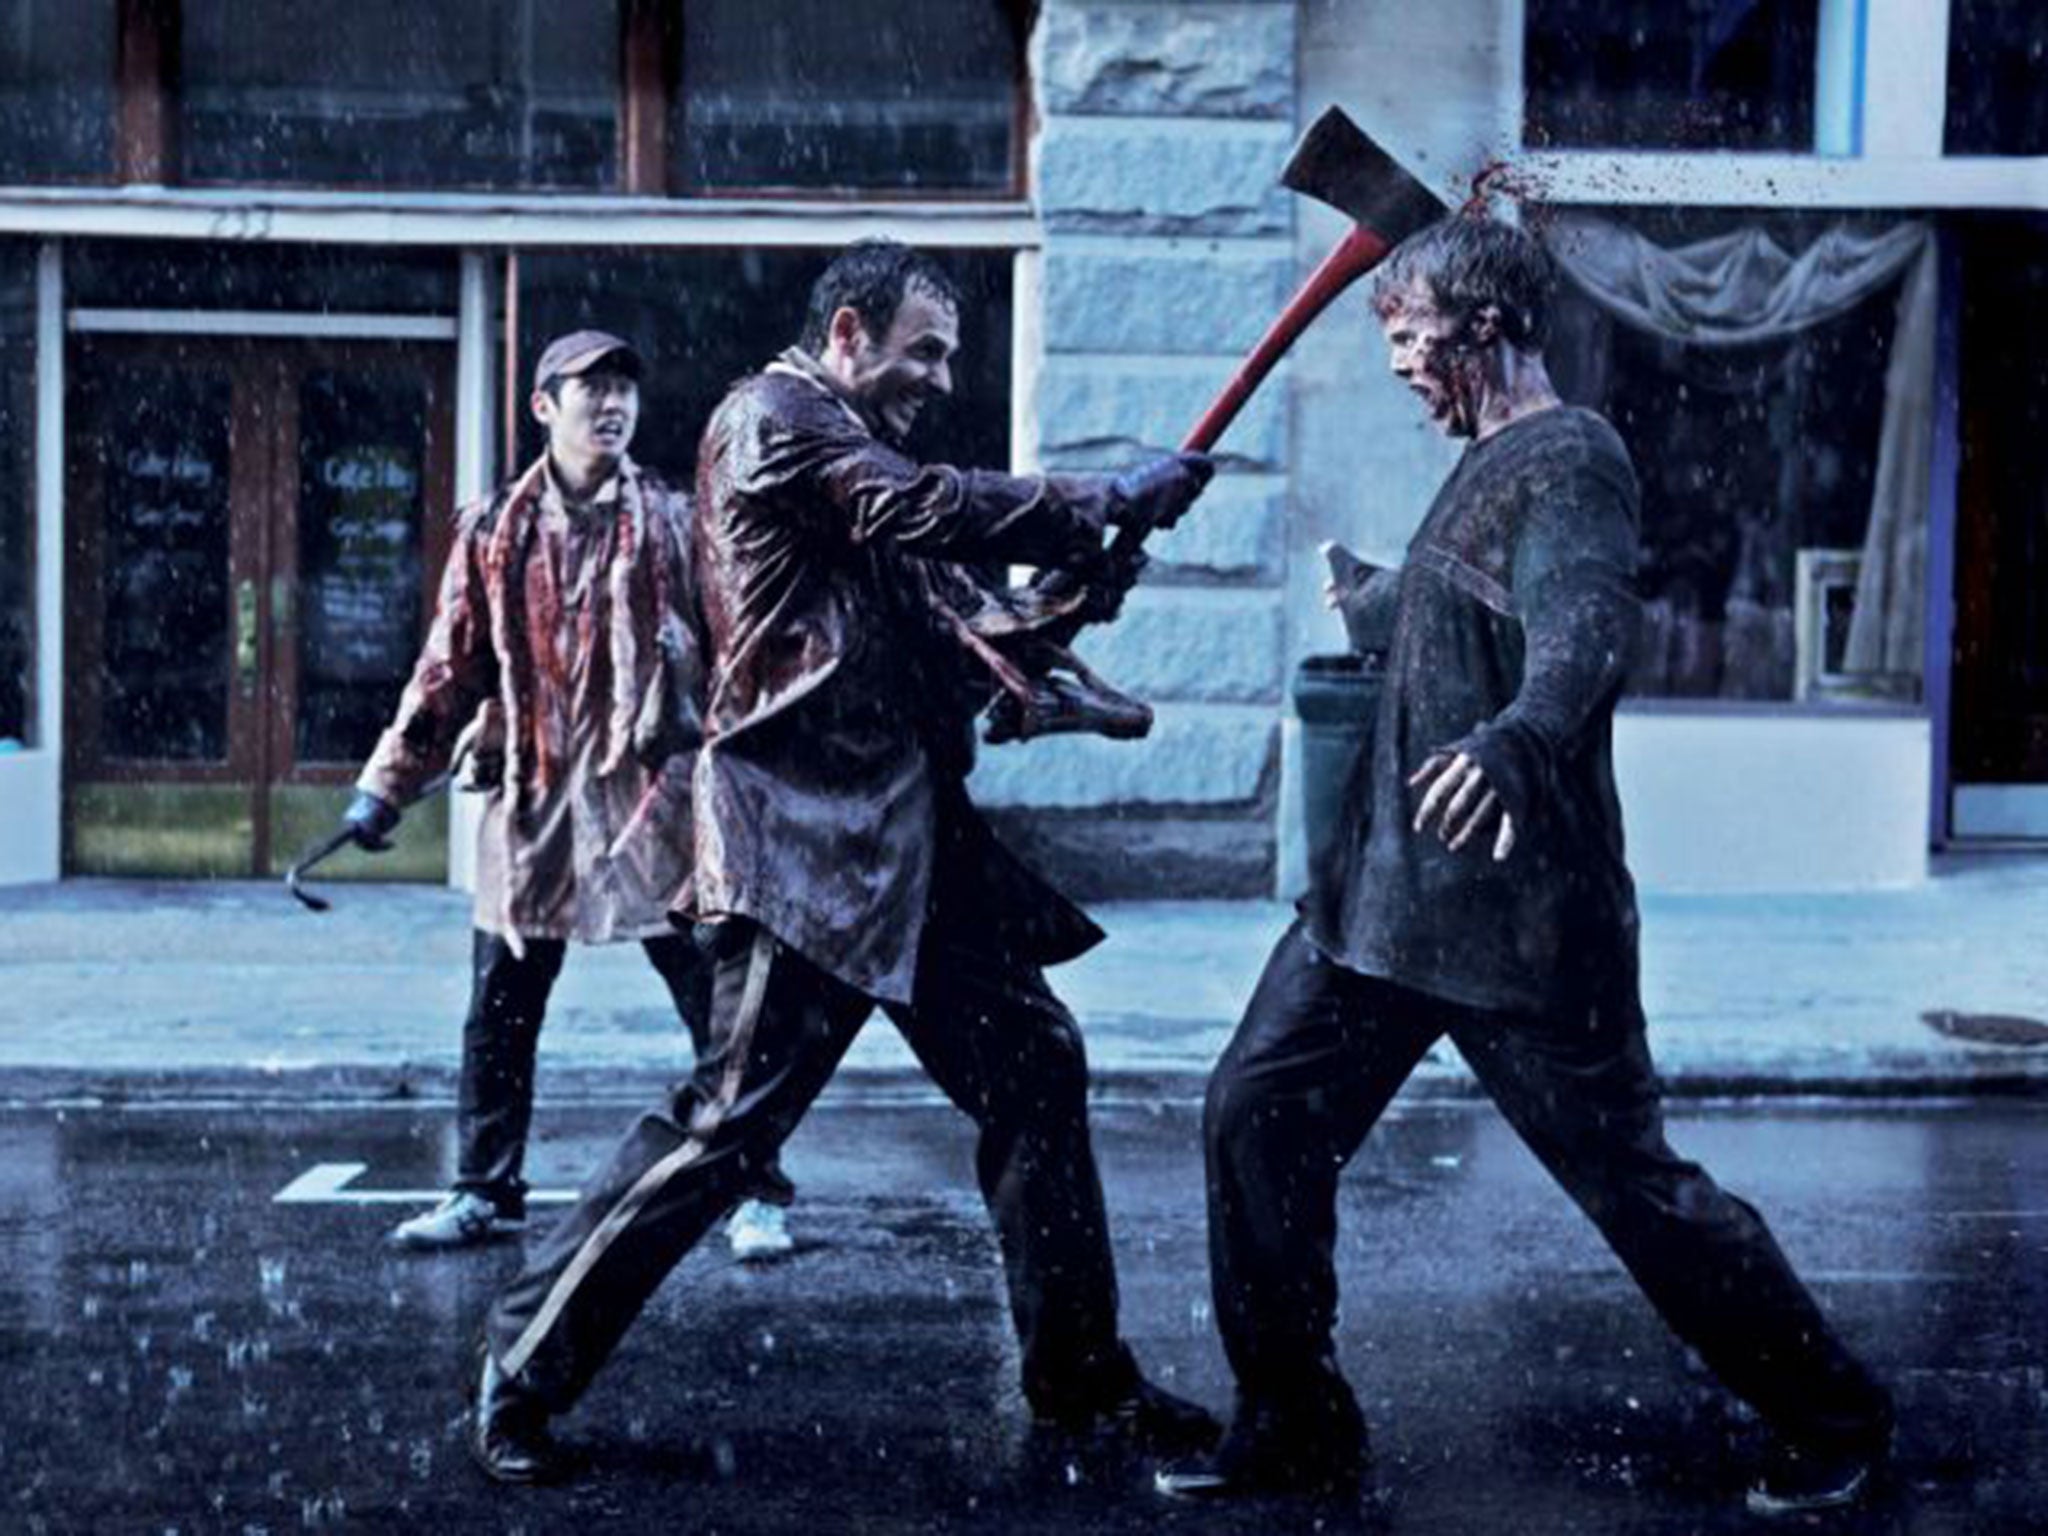 There will be blood: A graphic image from The Walking Dead